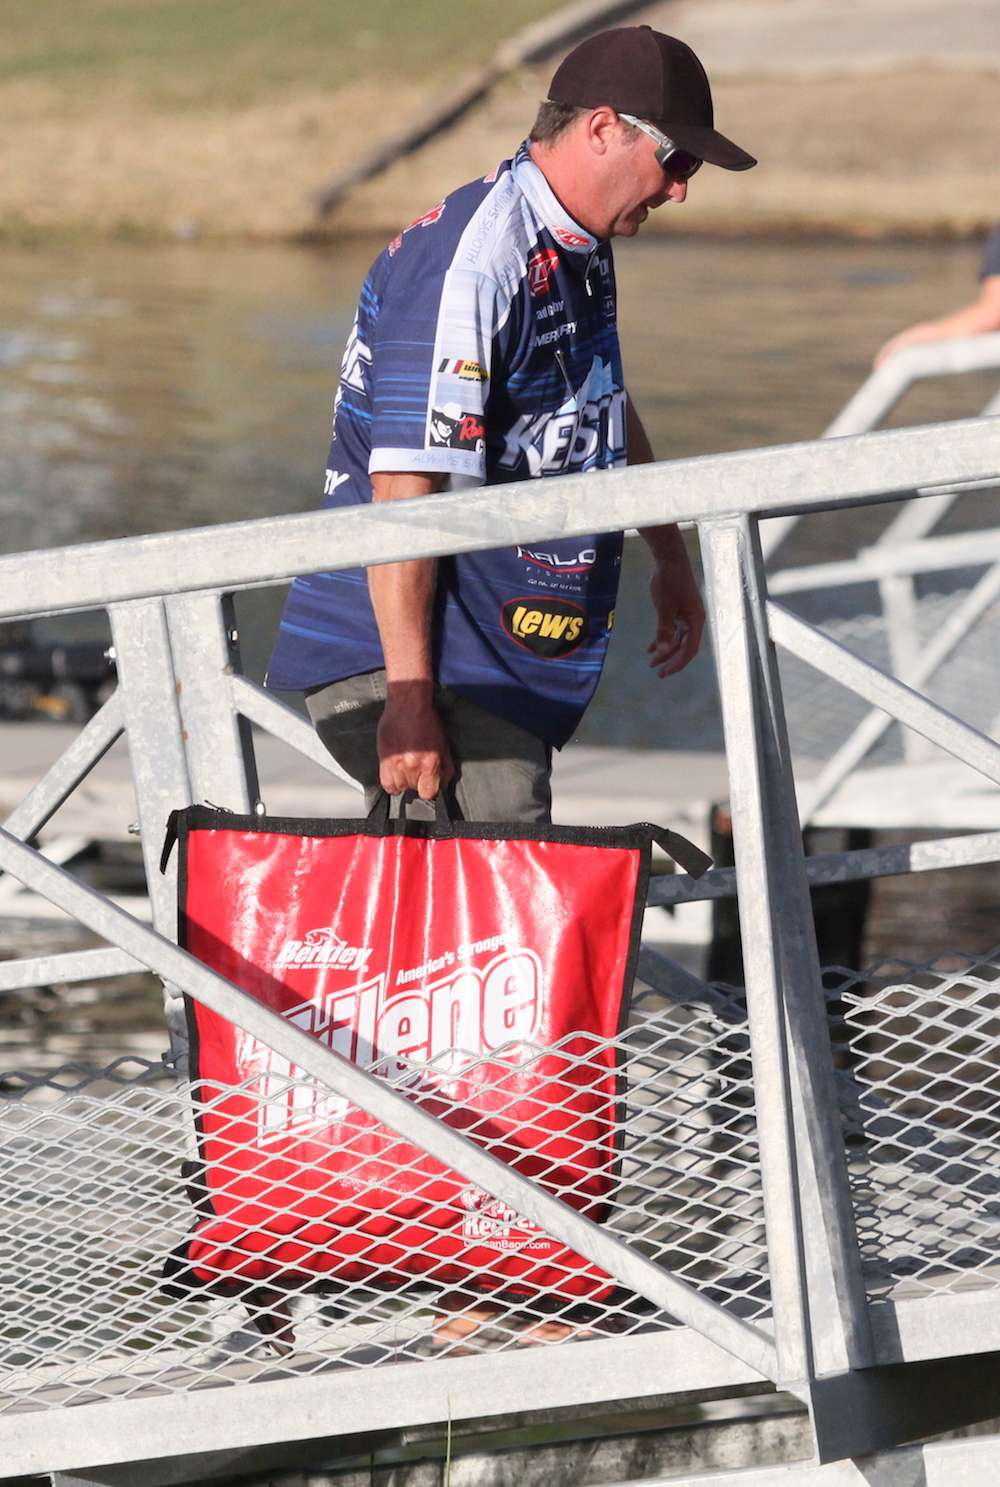 Another Elite Series hopeful, Chad Grimsby heads to the scales with a good bag in tow.